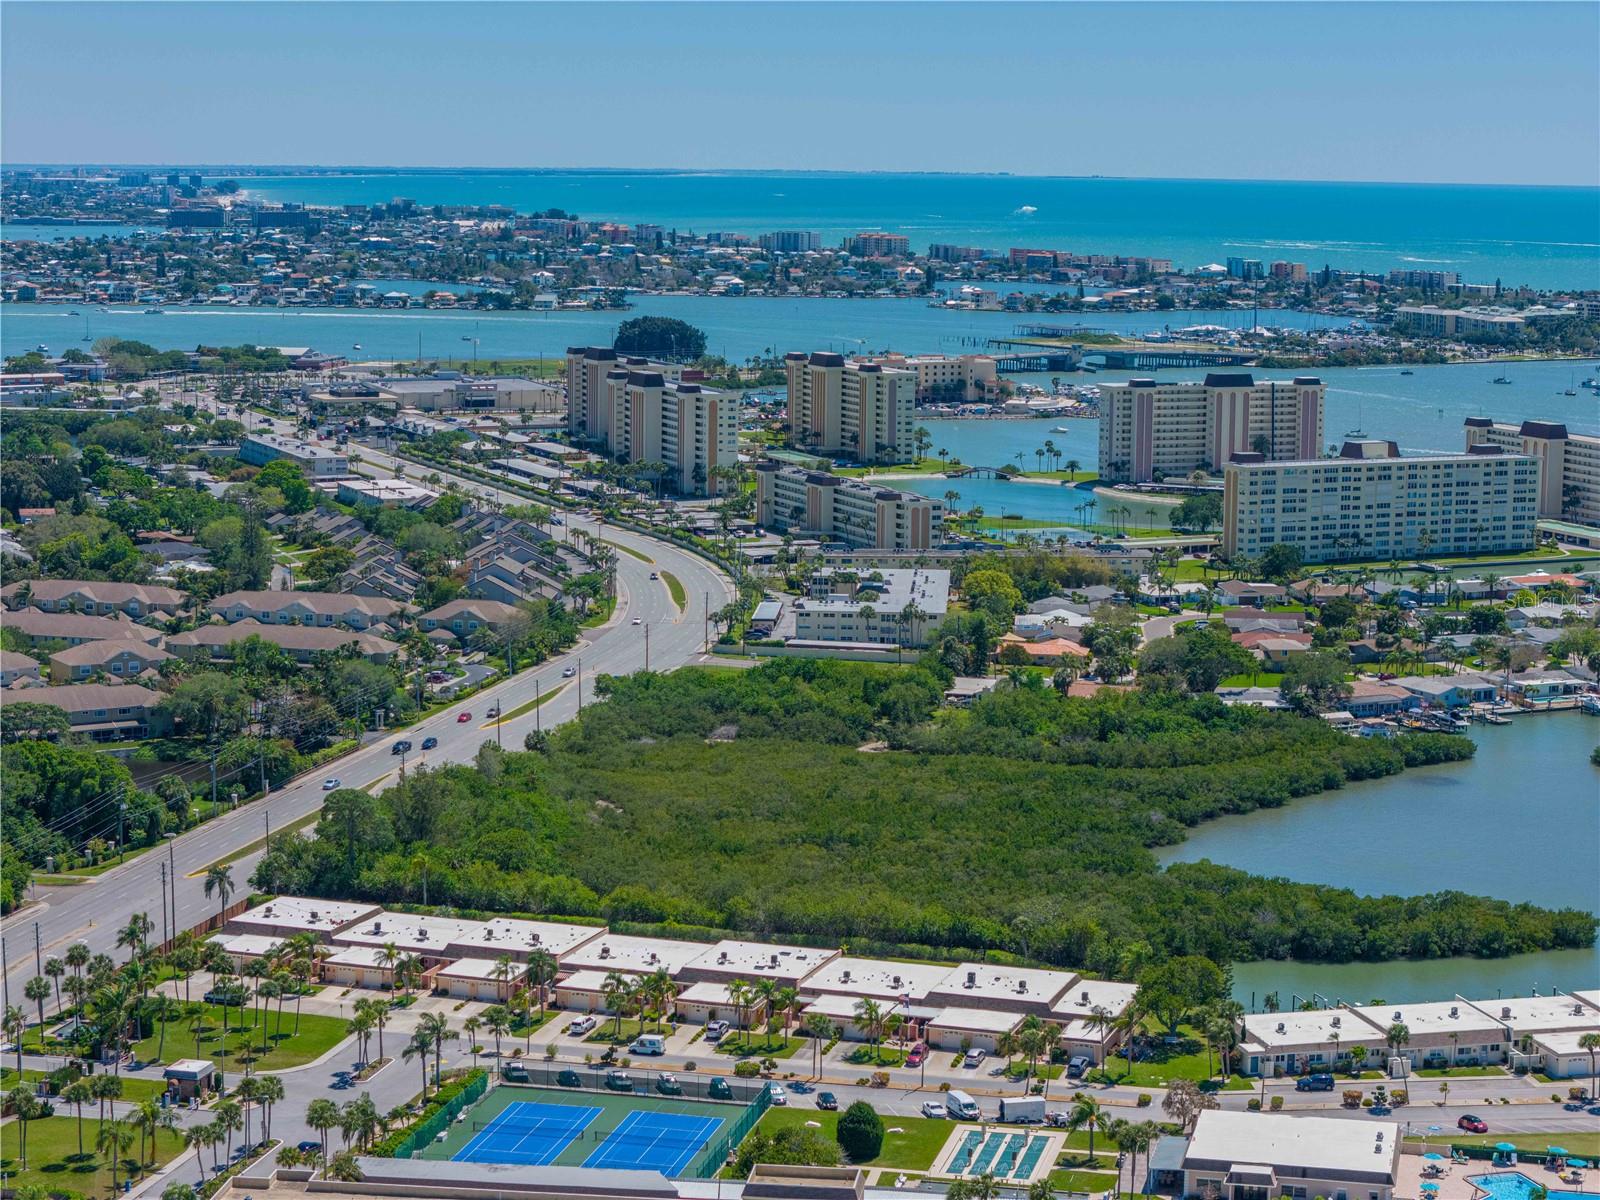 Aerial of community and Intracoastal Waterway